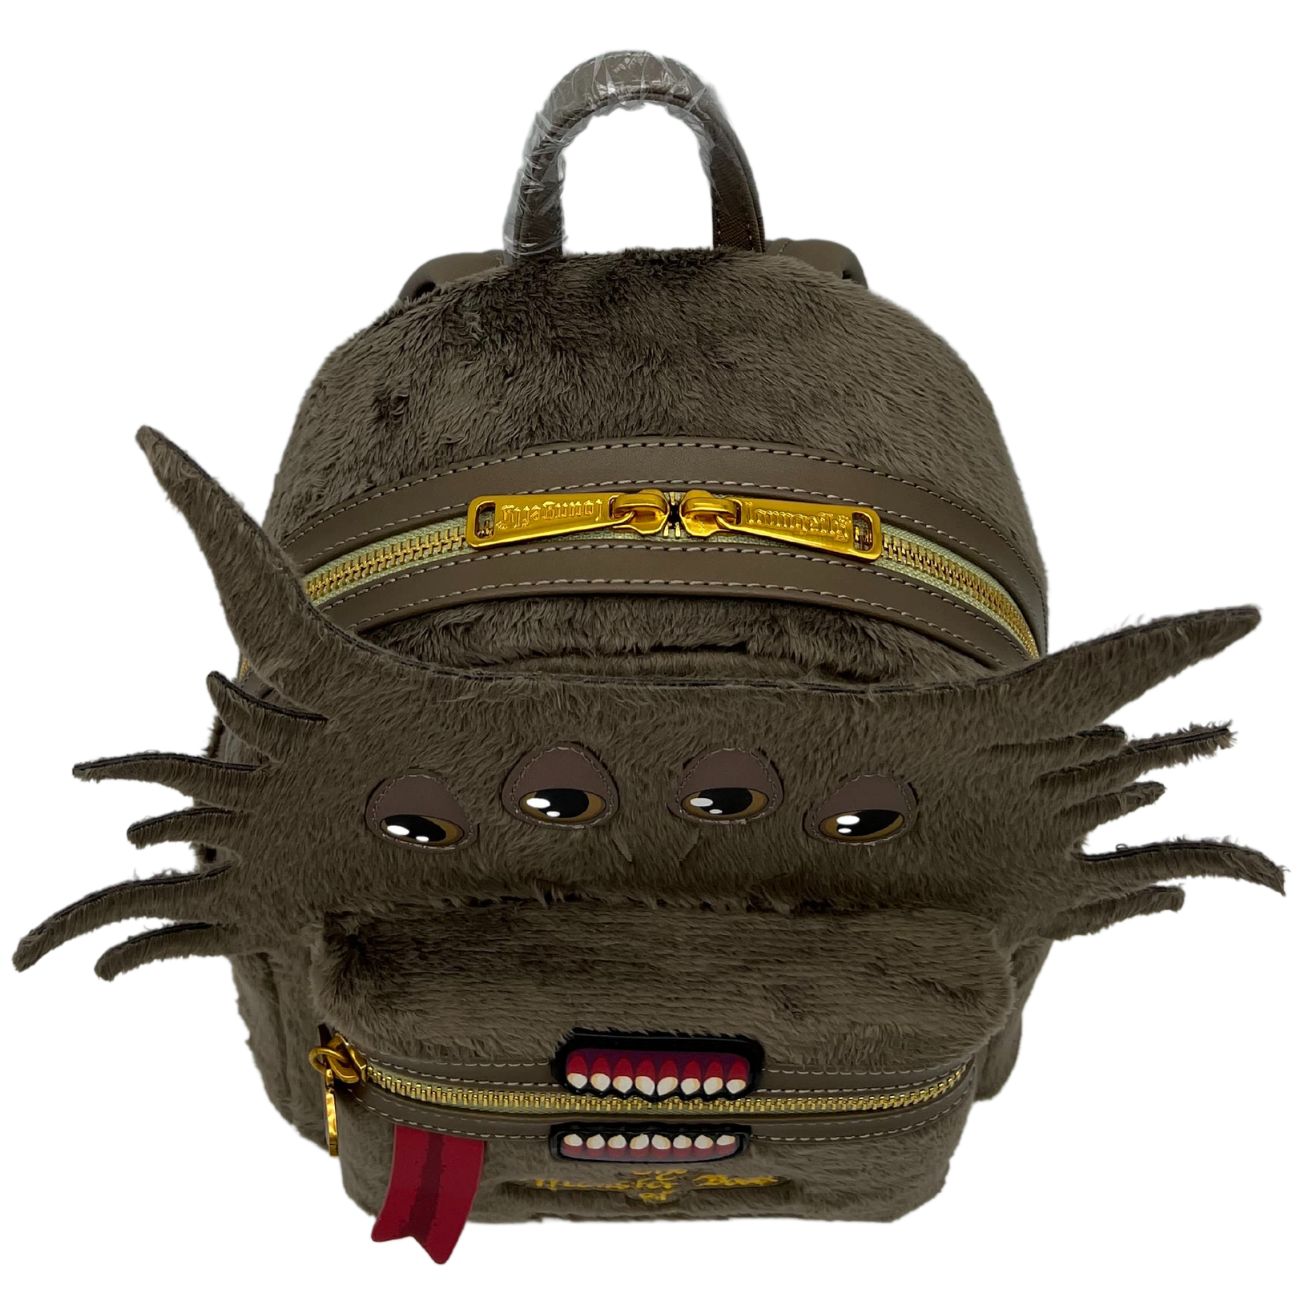 Loungefly Harry Potter Monster Book of Monsters Mini Backpack (Exclusive)